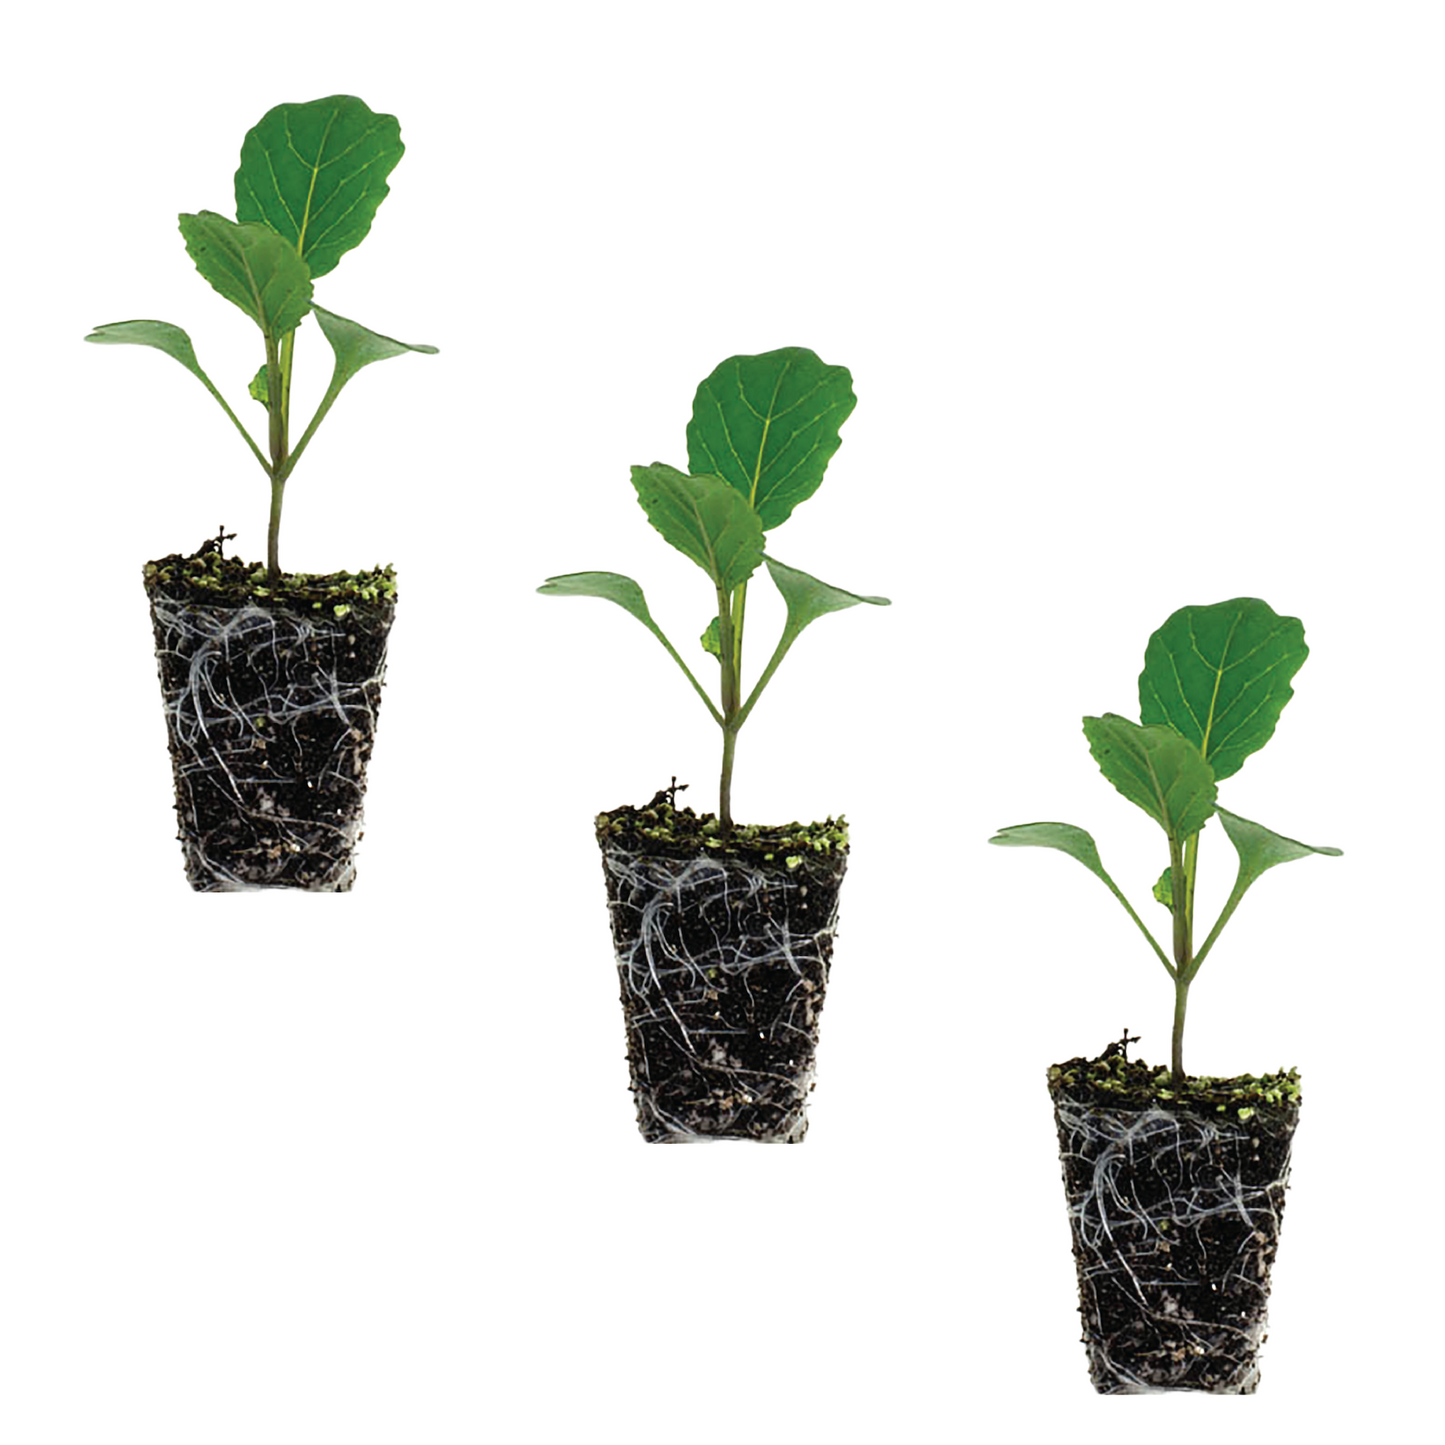 Brussels Sprouts Long Island Green Plantlings Live Baby Plants 1-3in., 3-Pack